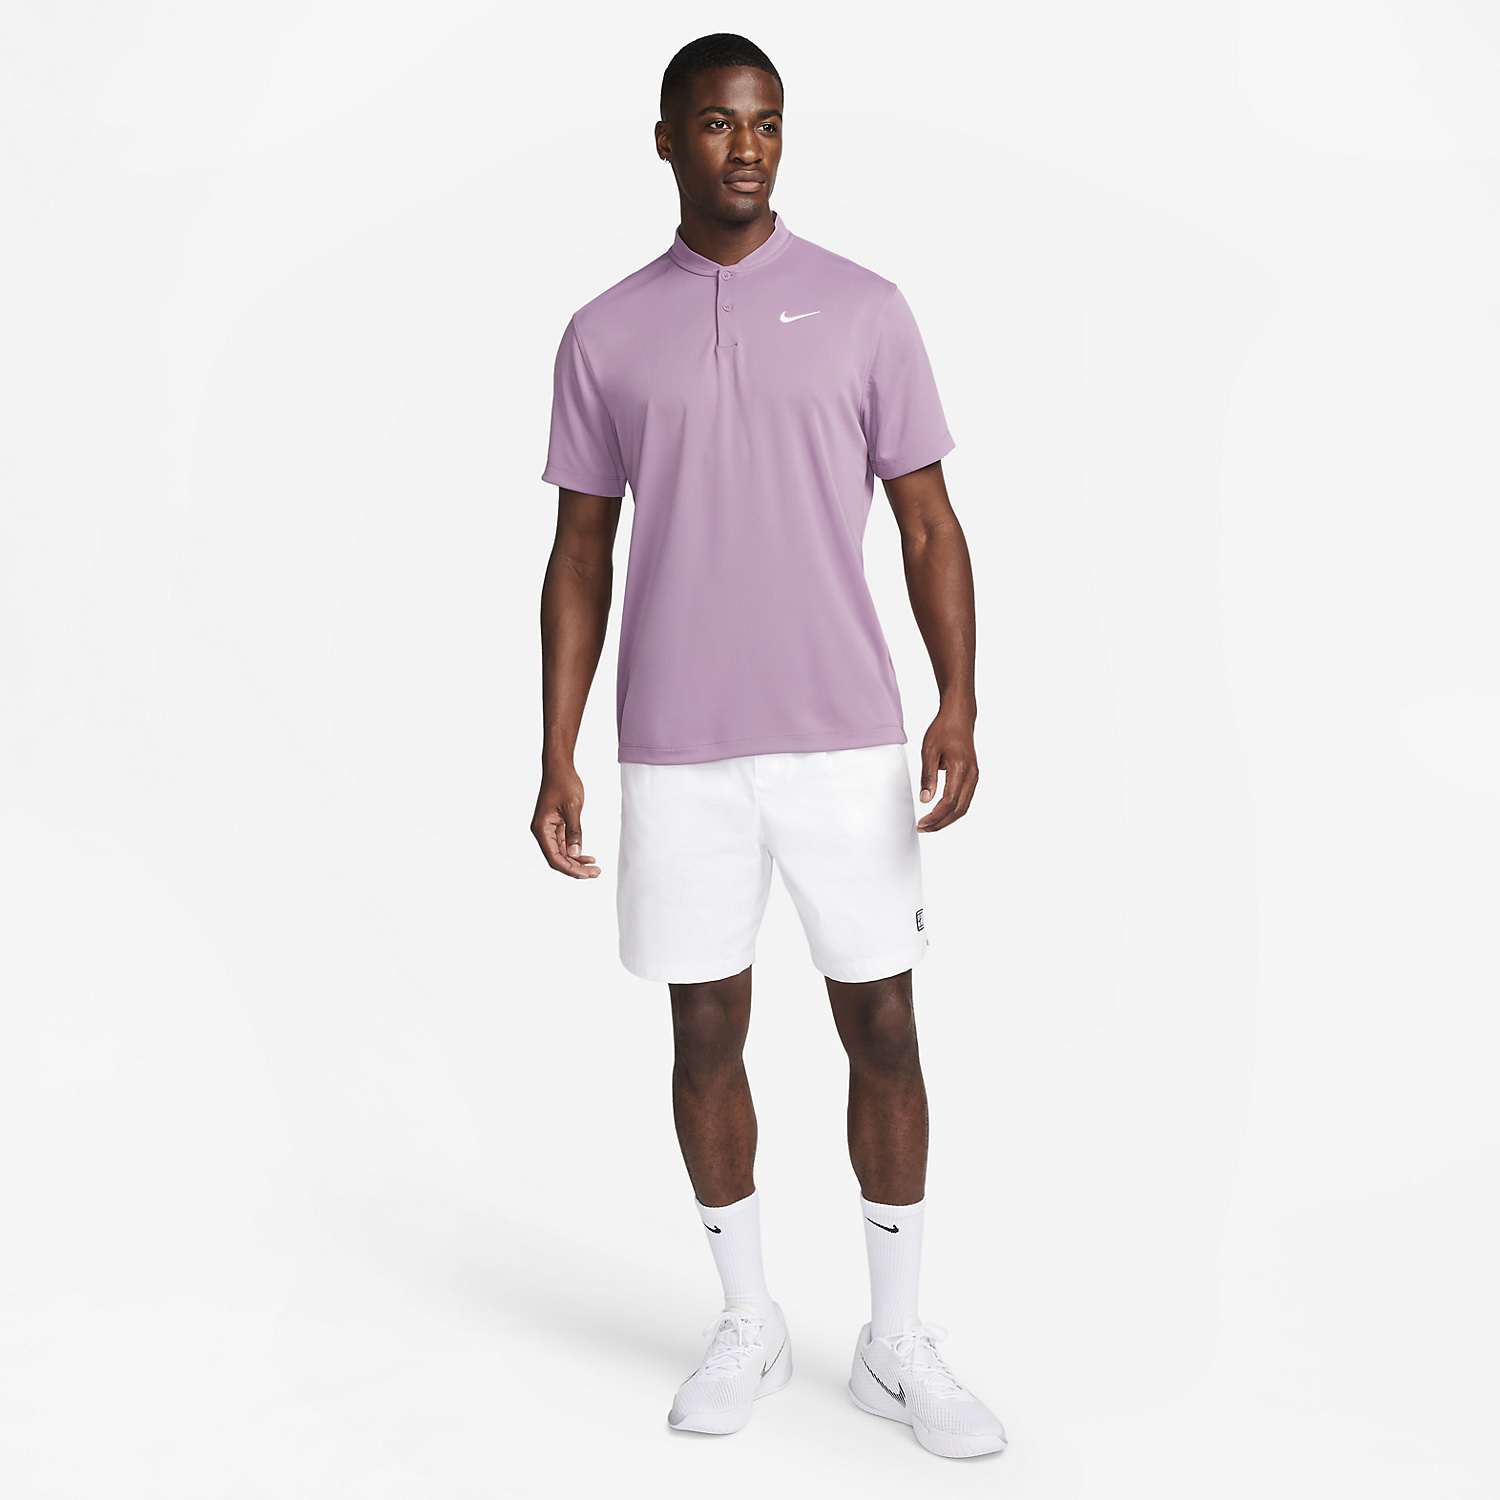 Nike Dri-FIT Blade Solid Polo - Violet Dust/White